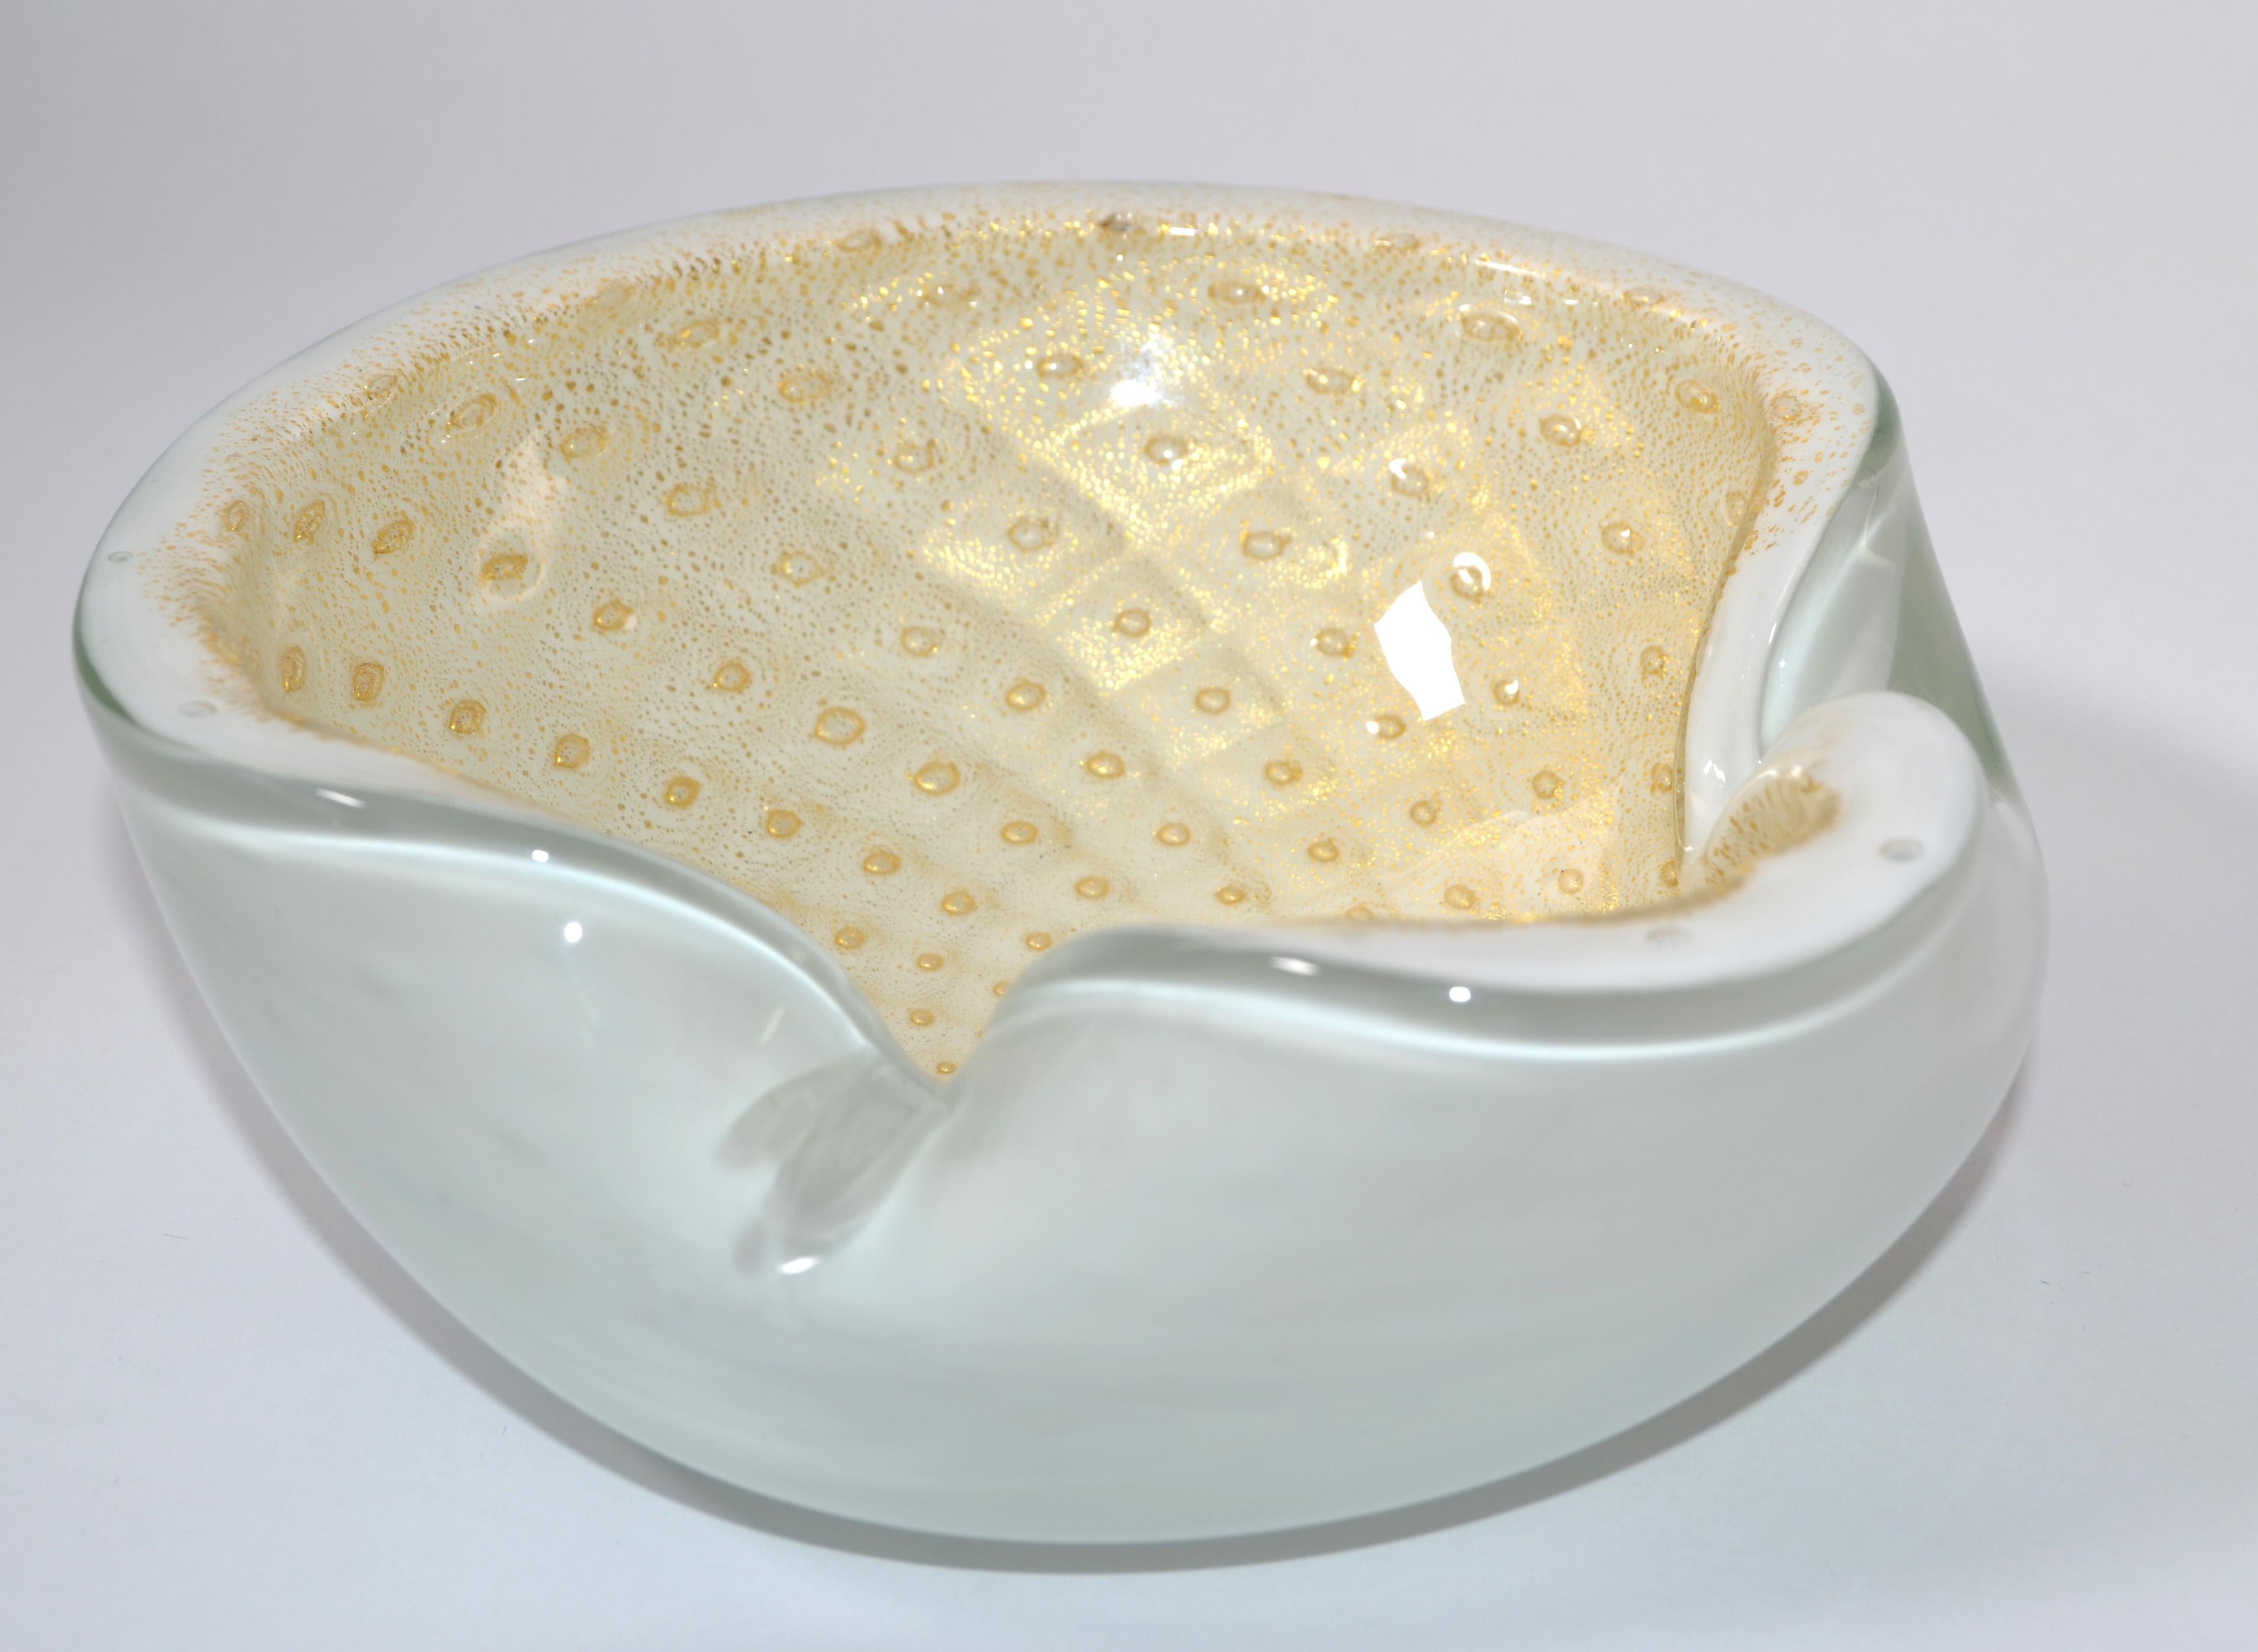 Italian Mid-Century Modern Murano triple cased white, beige & gold dust blown glass bowl, catchall or ashtray in the Style of Seguso Vetri d'Arte from the Murano Sommerso Workshop. 
Made in the late 1960.
Simply beautiful.